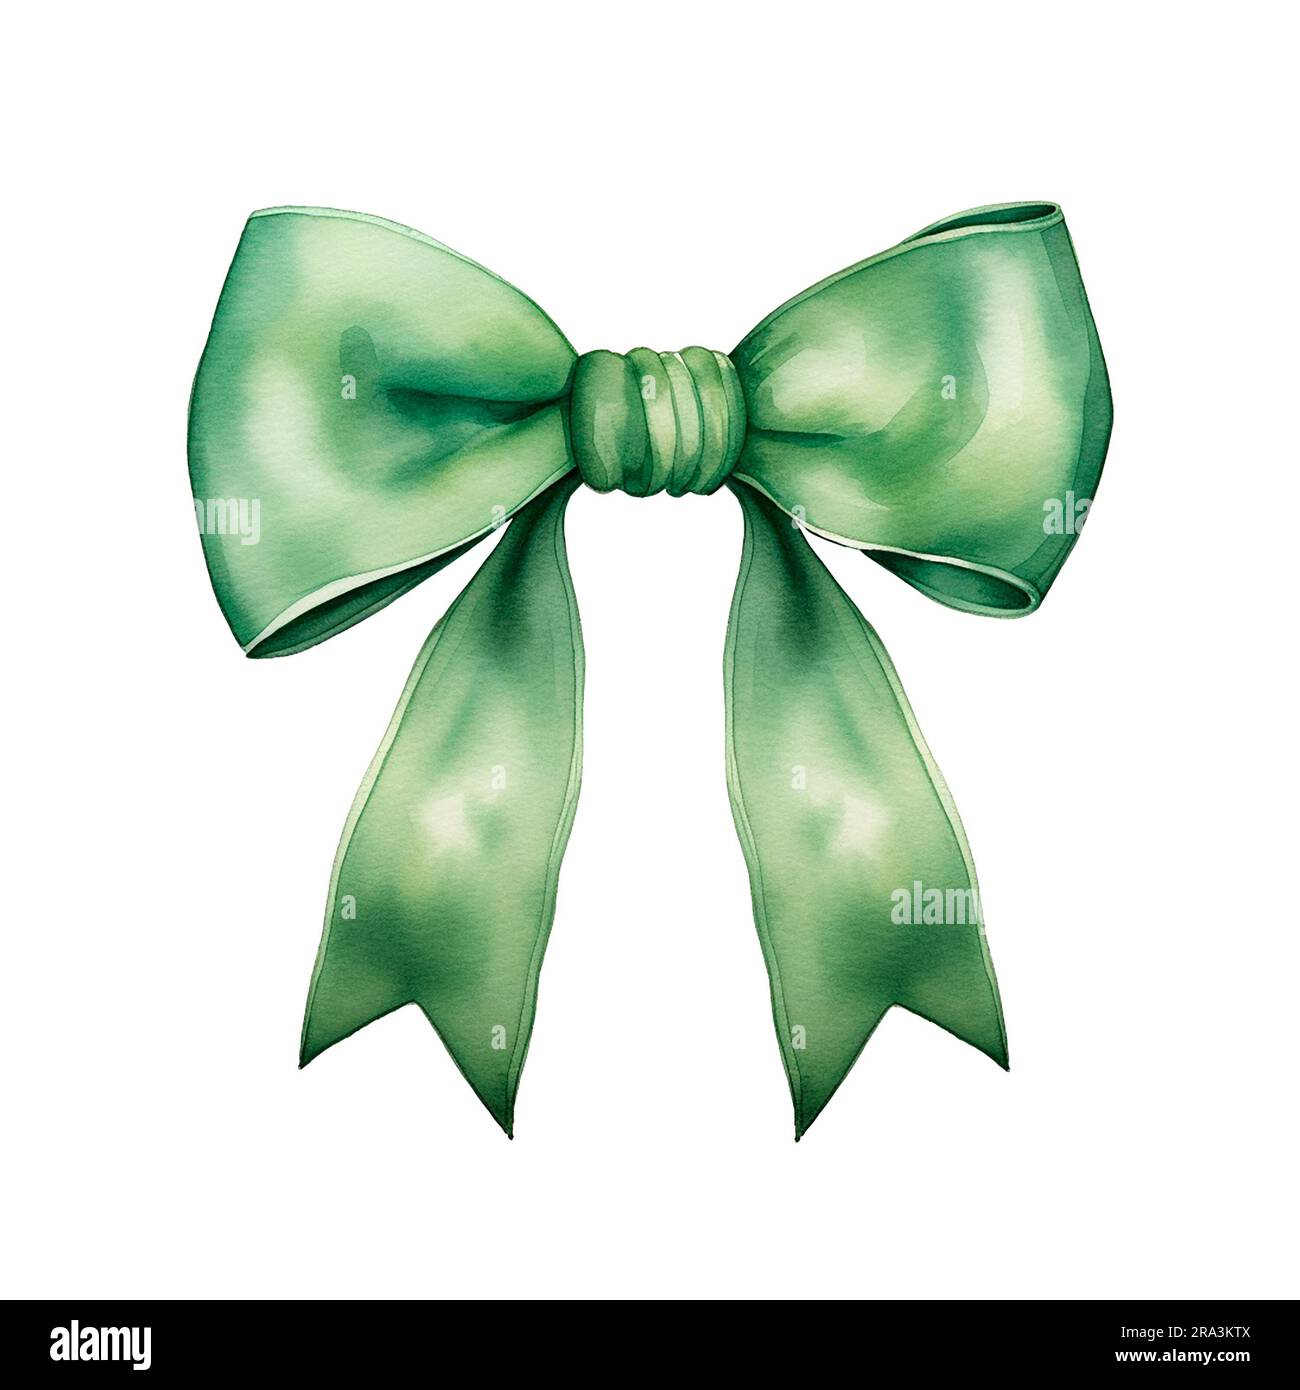 Olive green gift ribbon in a bow Stock Photo - Alamy